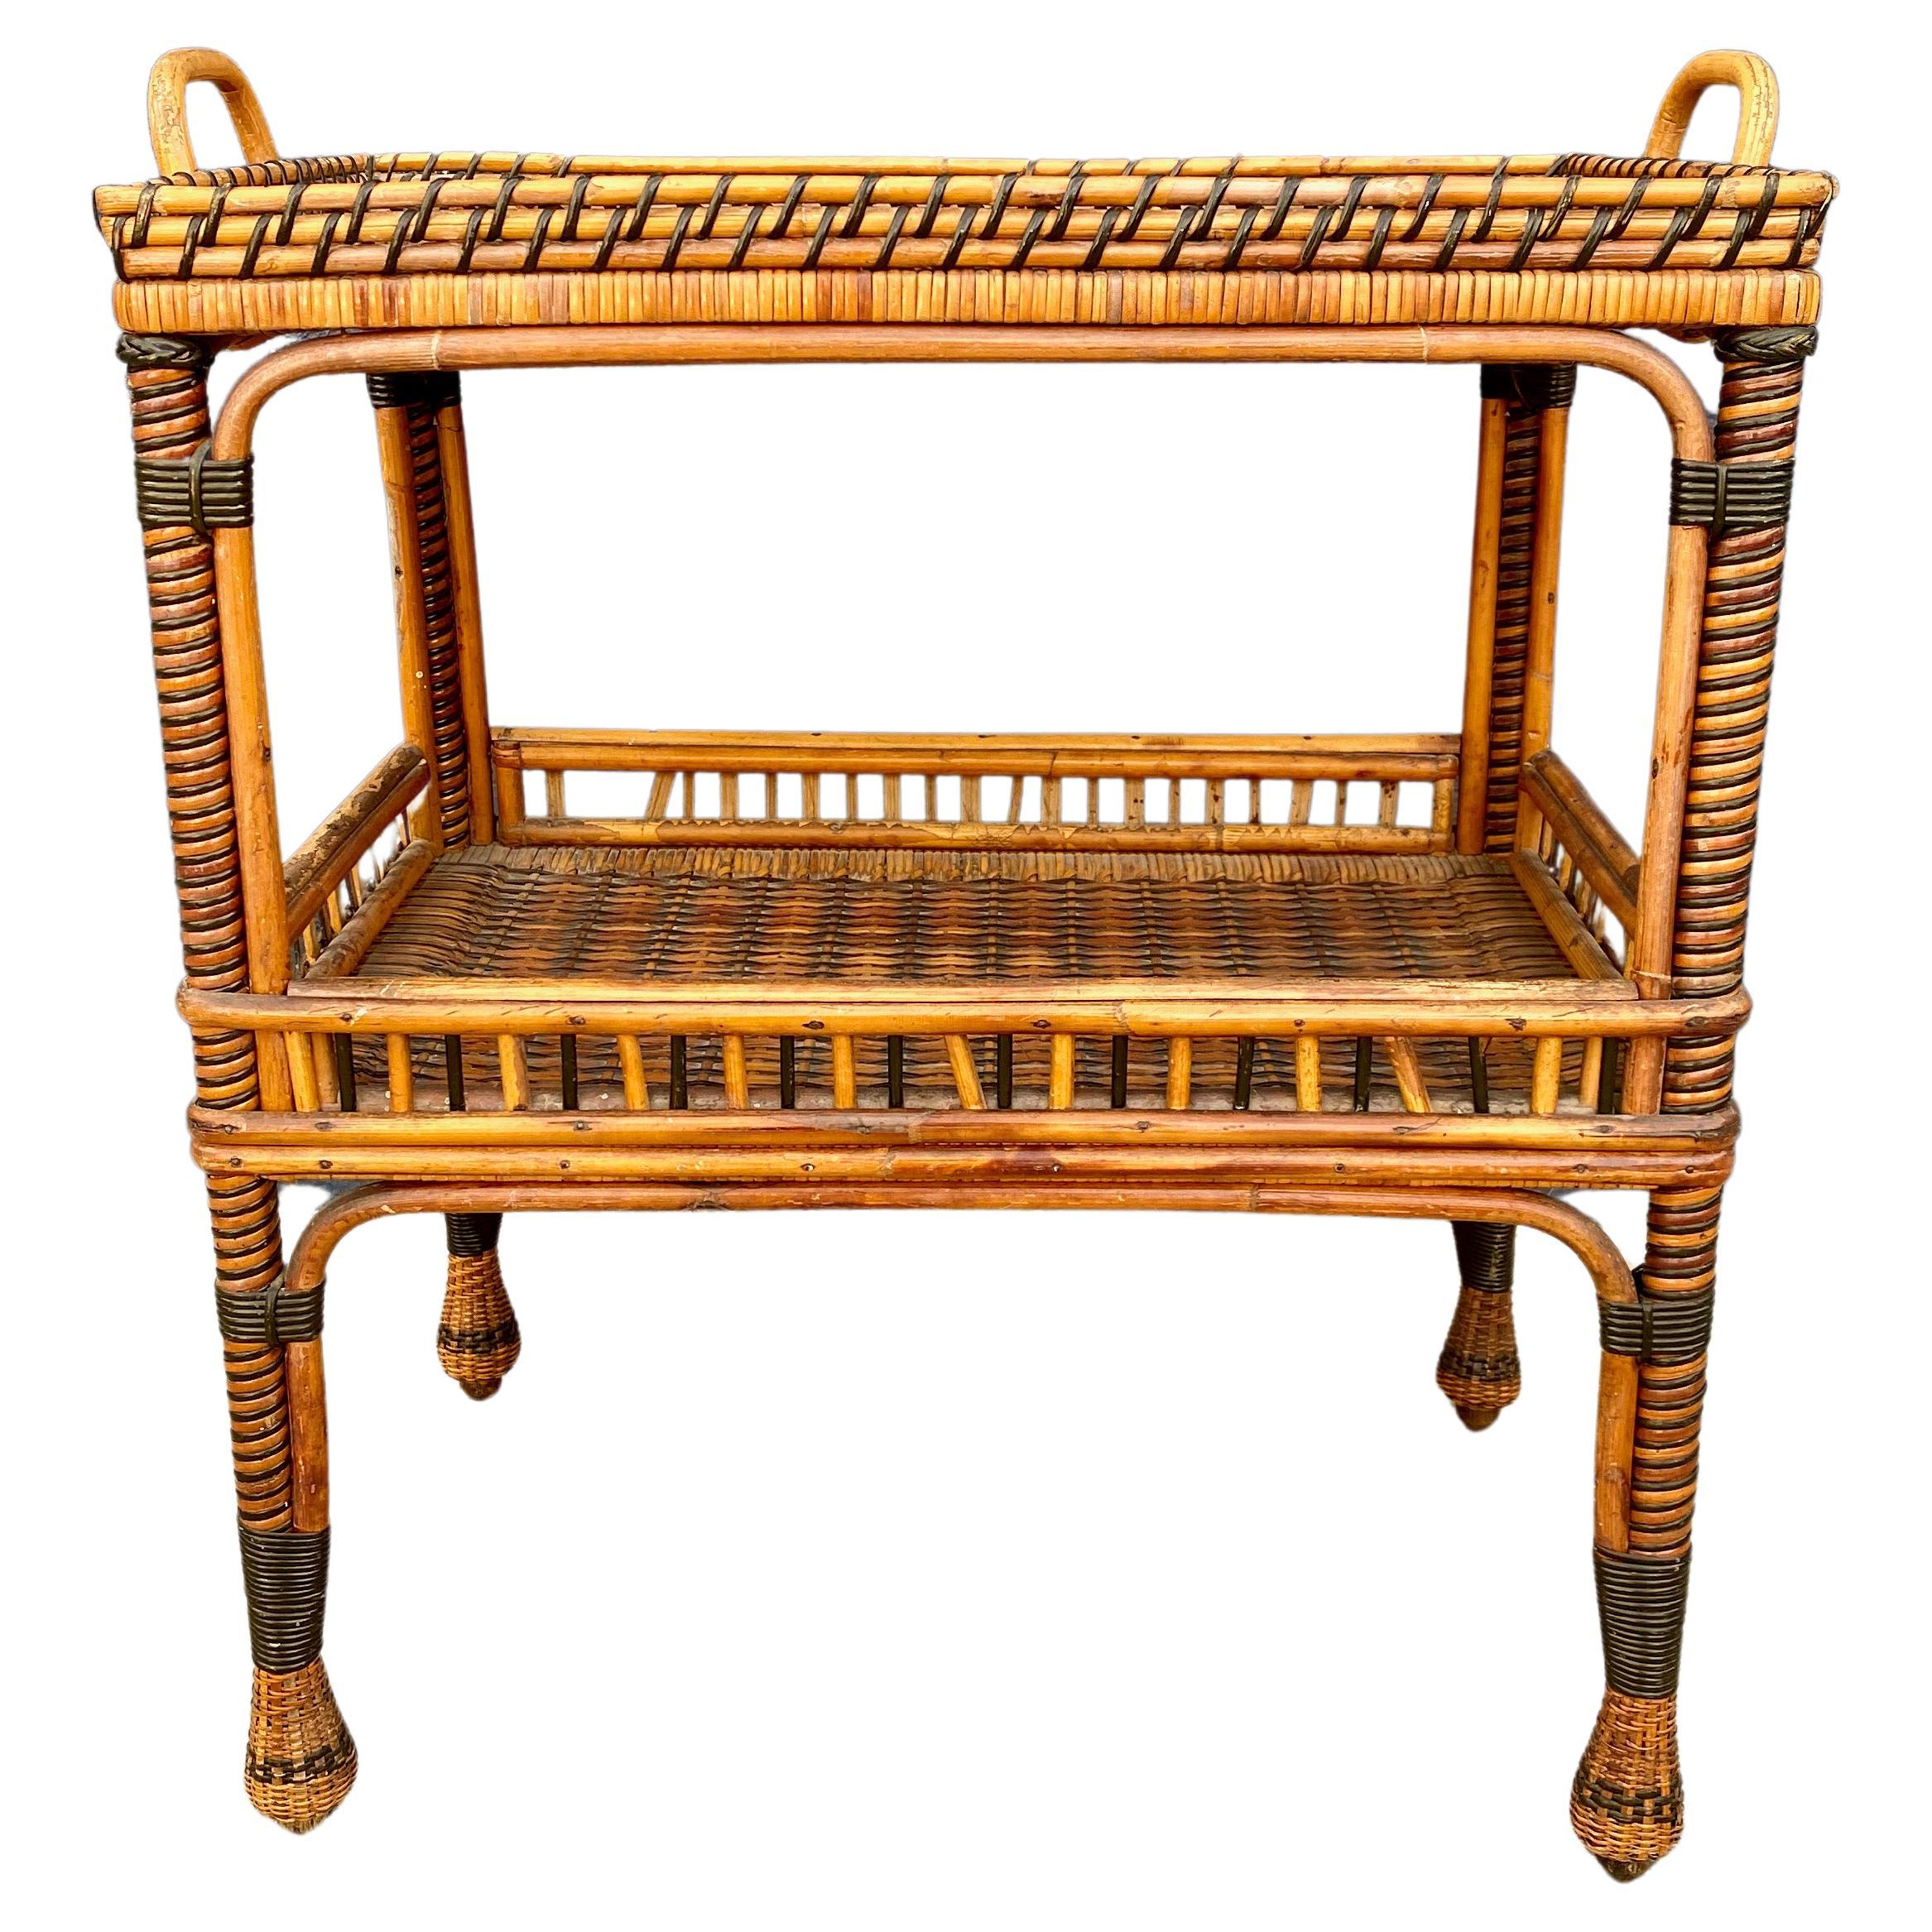 French Woven Rattan Side Table, c. 1930-1940